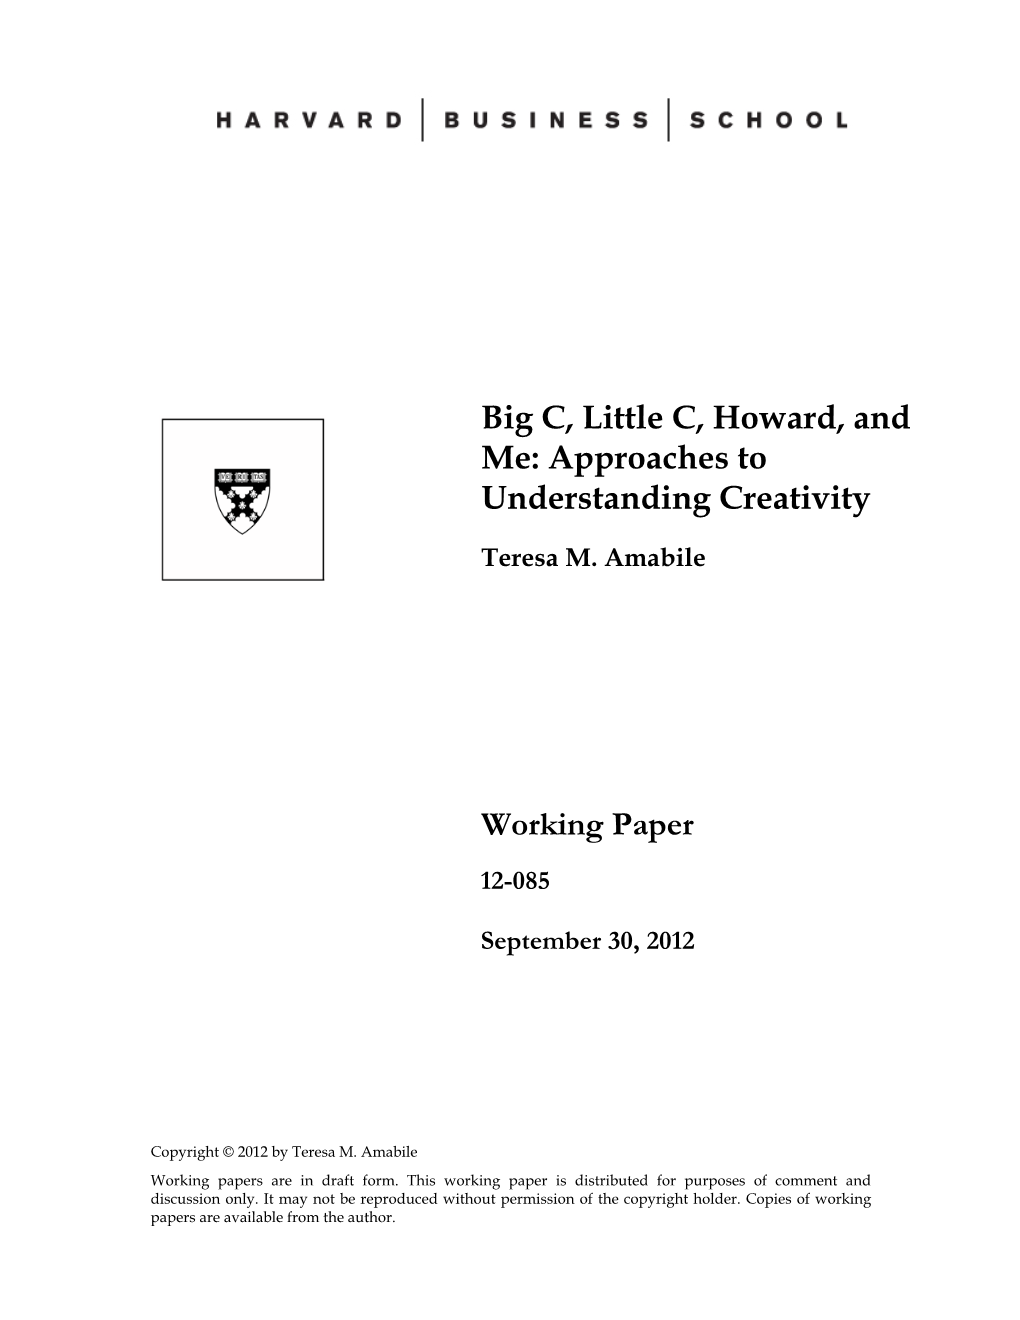 Big C, Little C, Howard, and Me: Approaches to Understanding Creativity